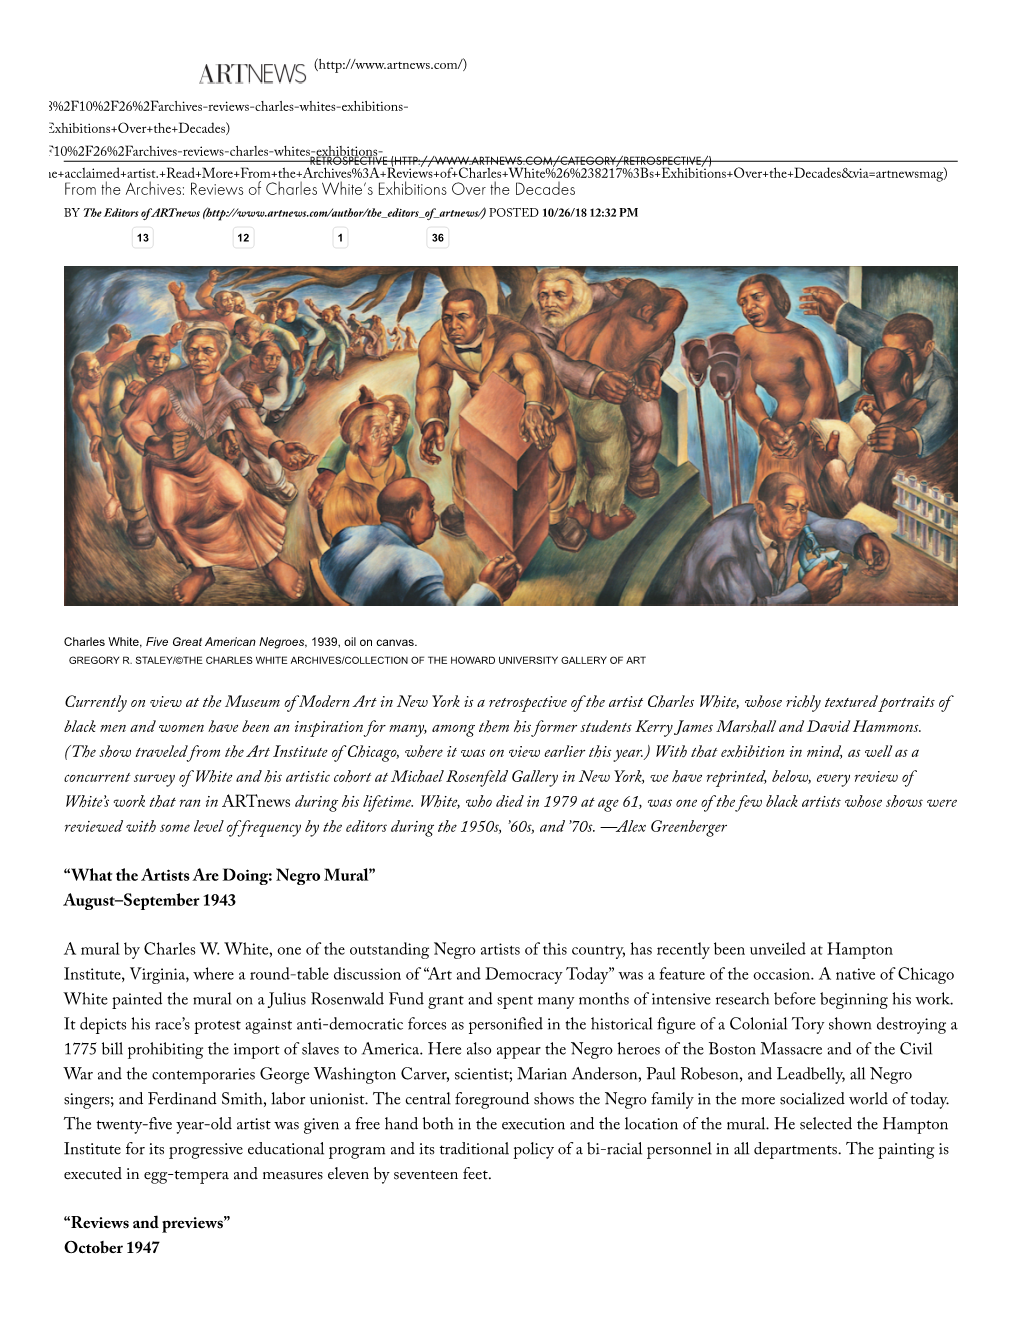 Reviews of Charles White's Exhibitions Over the Decades